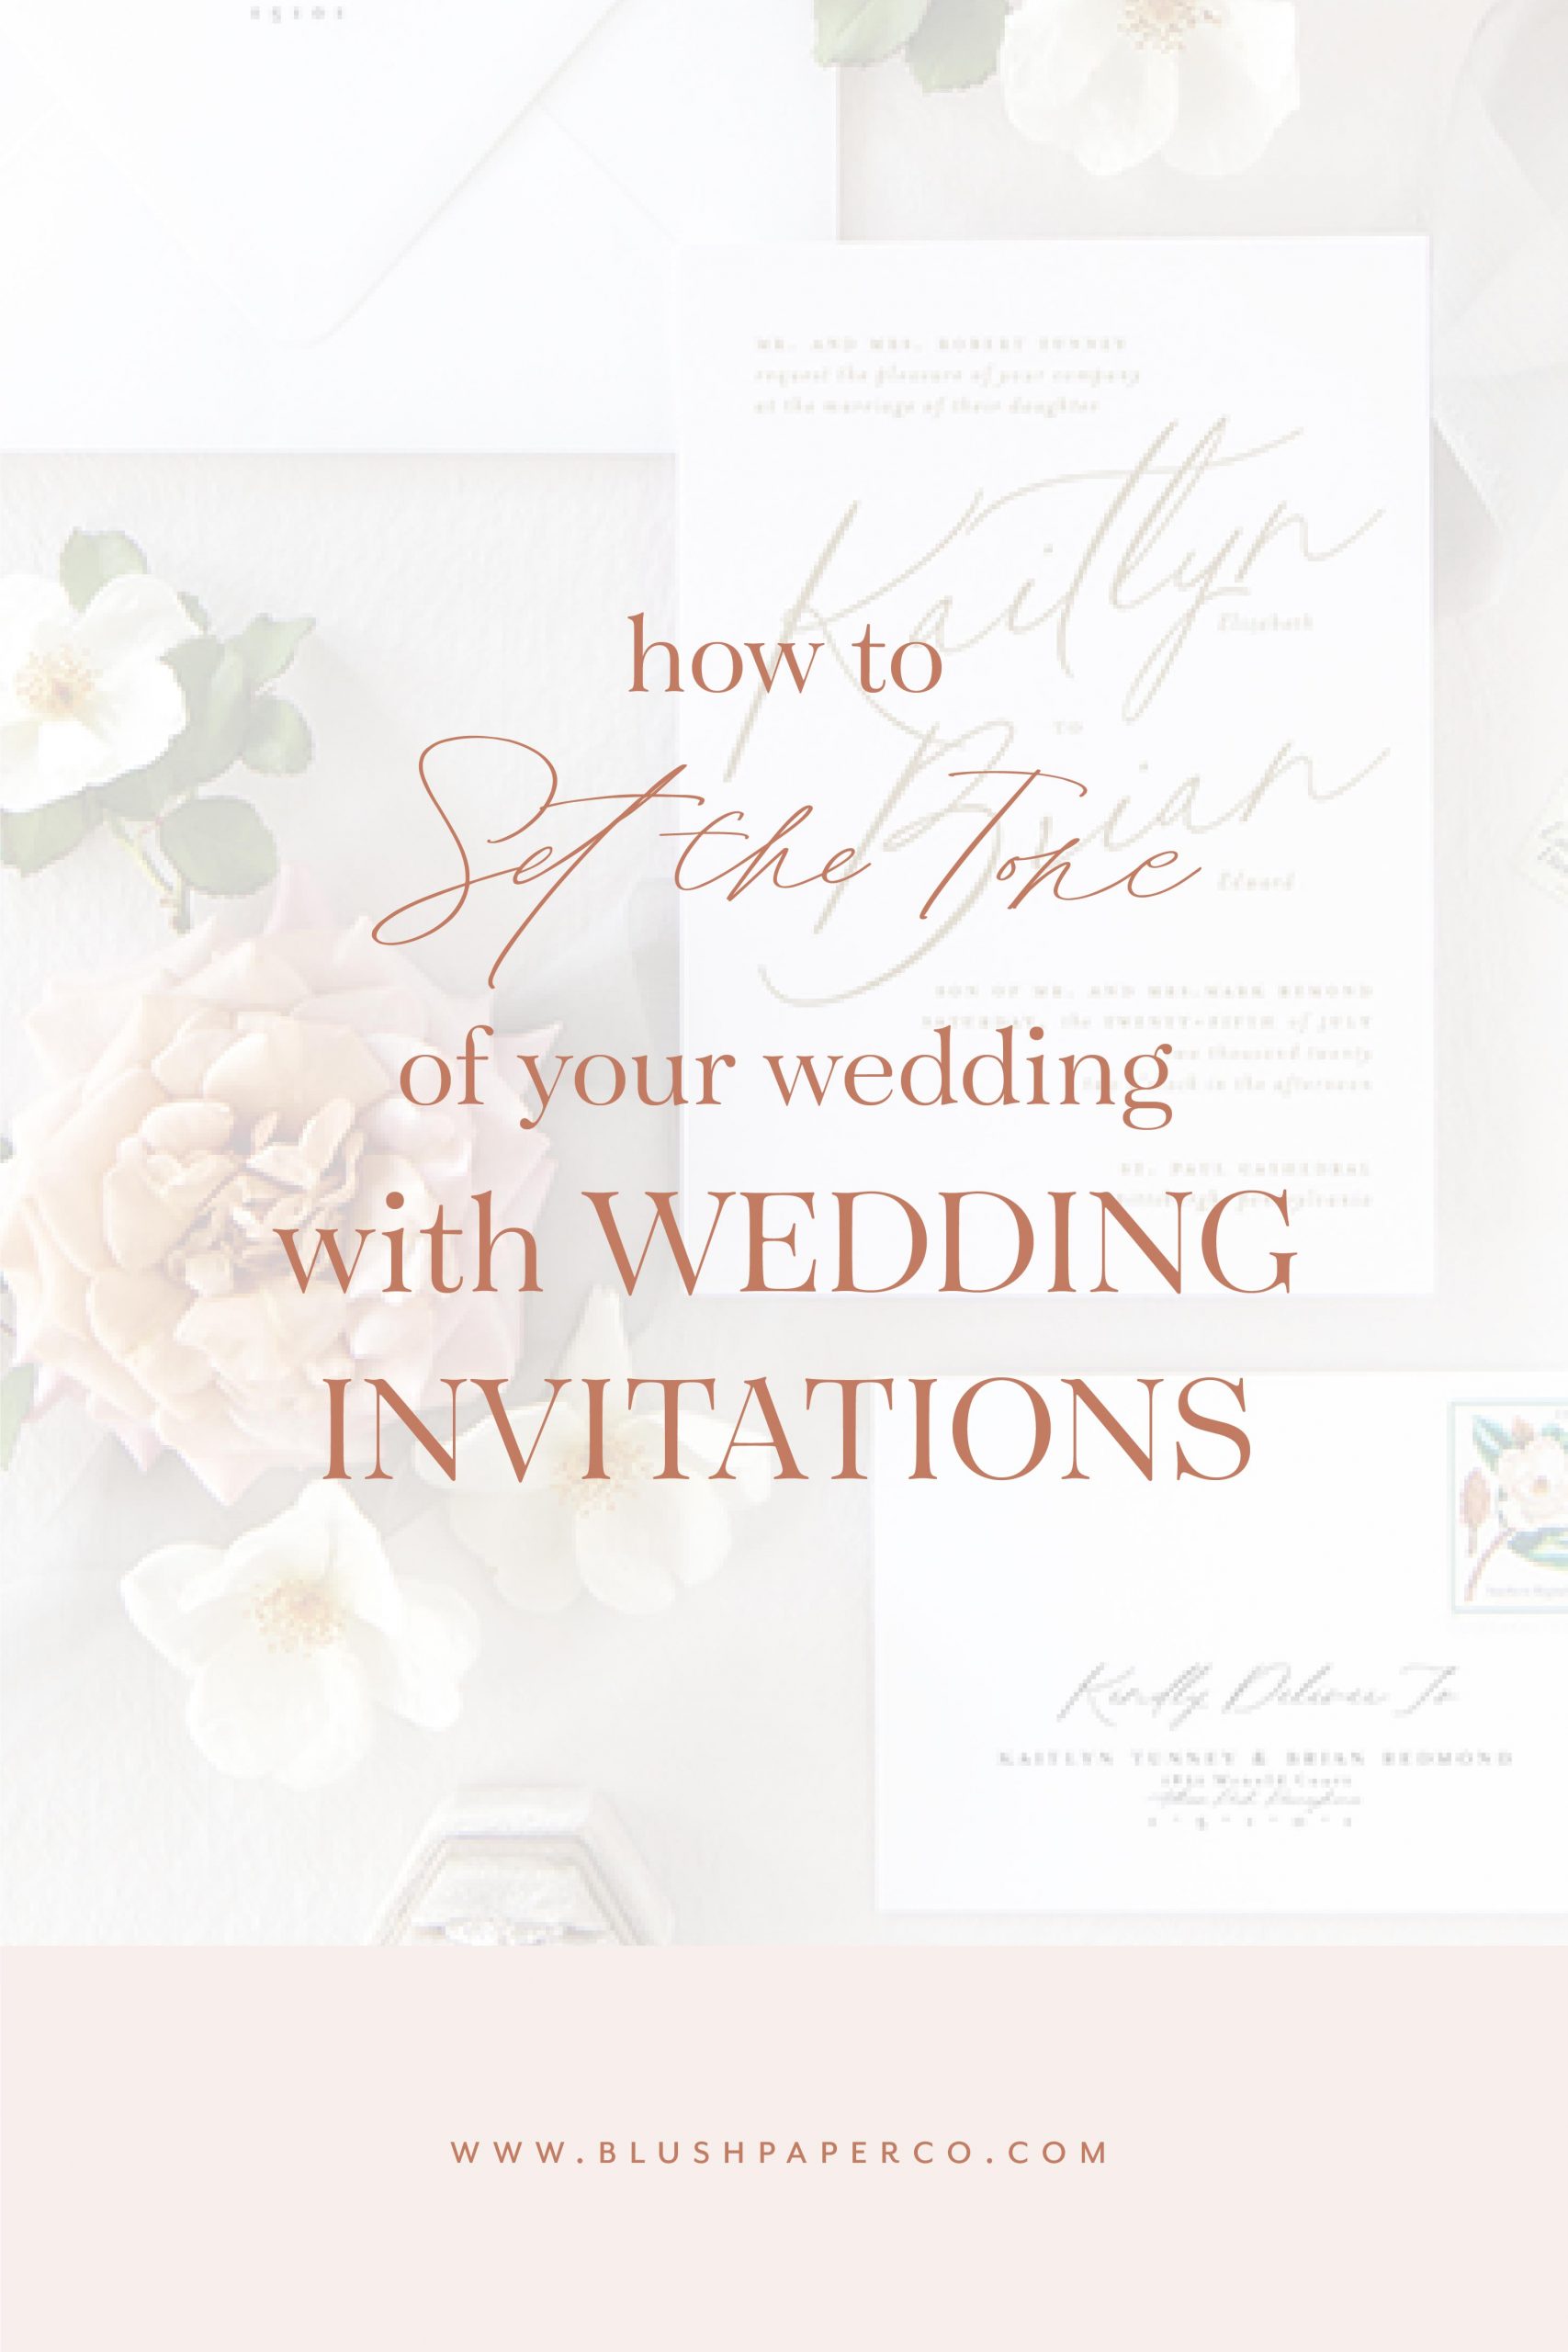 how to set the tone of your wedding - blog.blushpaperco.com